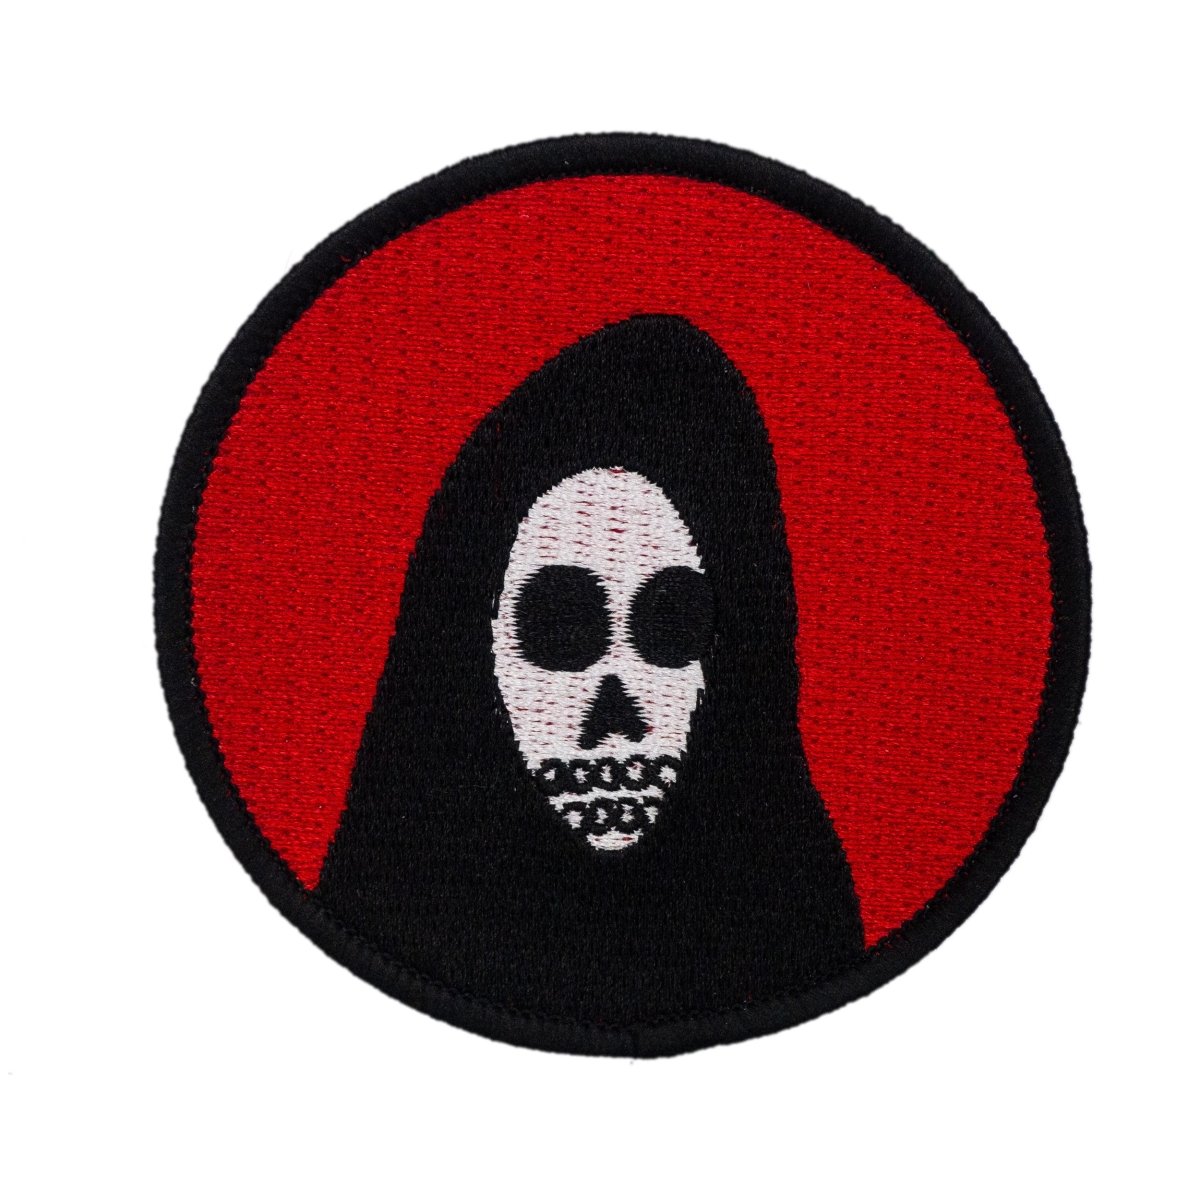 Shrouded bones patch - Patch - Pretty Bad Co.